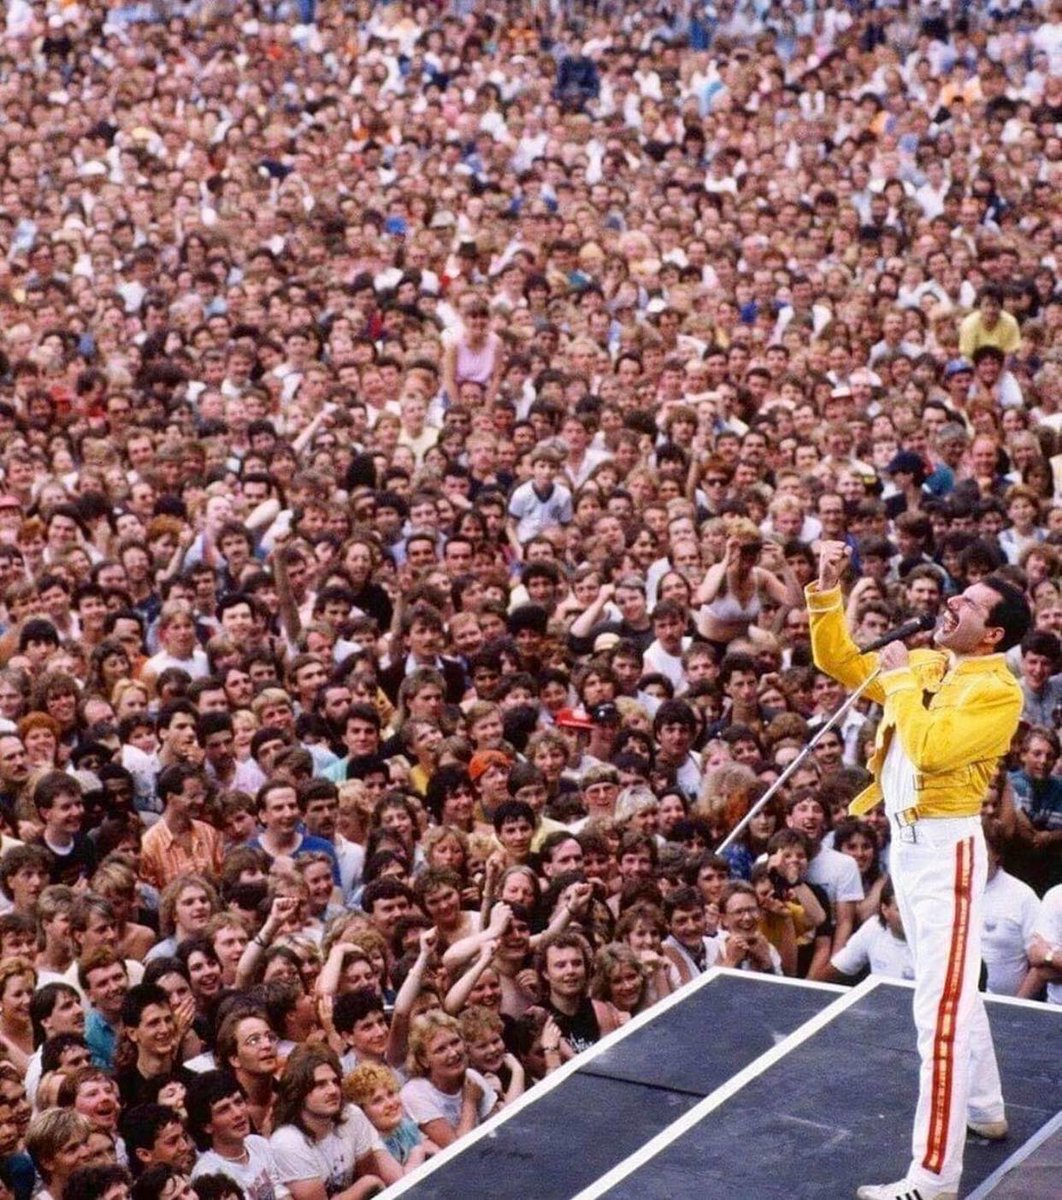 Freddie Mercury at Wembley, 1986. No phones, no cameras.... people are just enjoying the moment!